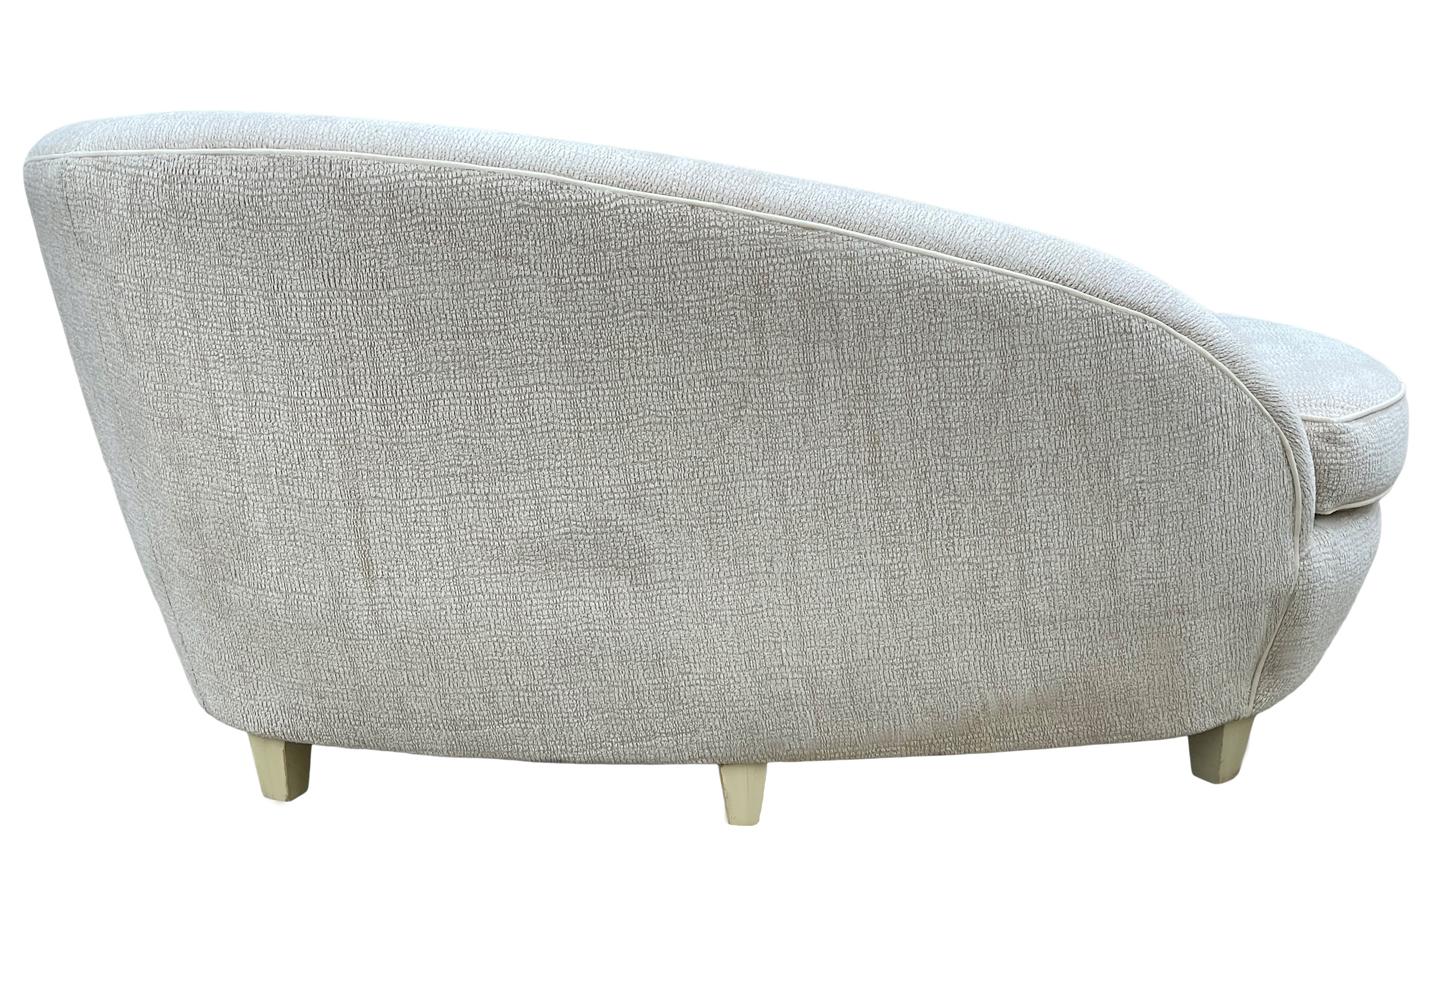 American Midcentury Post Modern Kidney Shaped Chaise Lounge or Petite Sofa For Sale